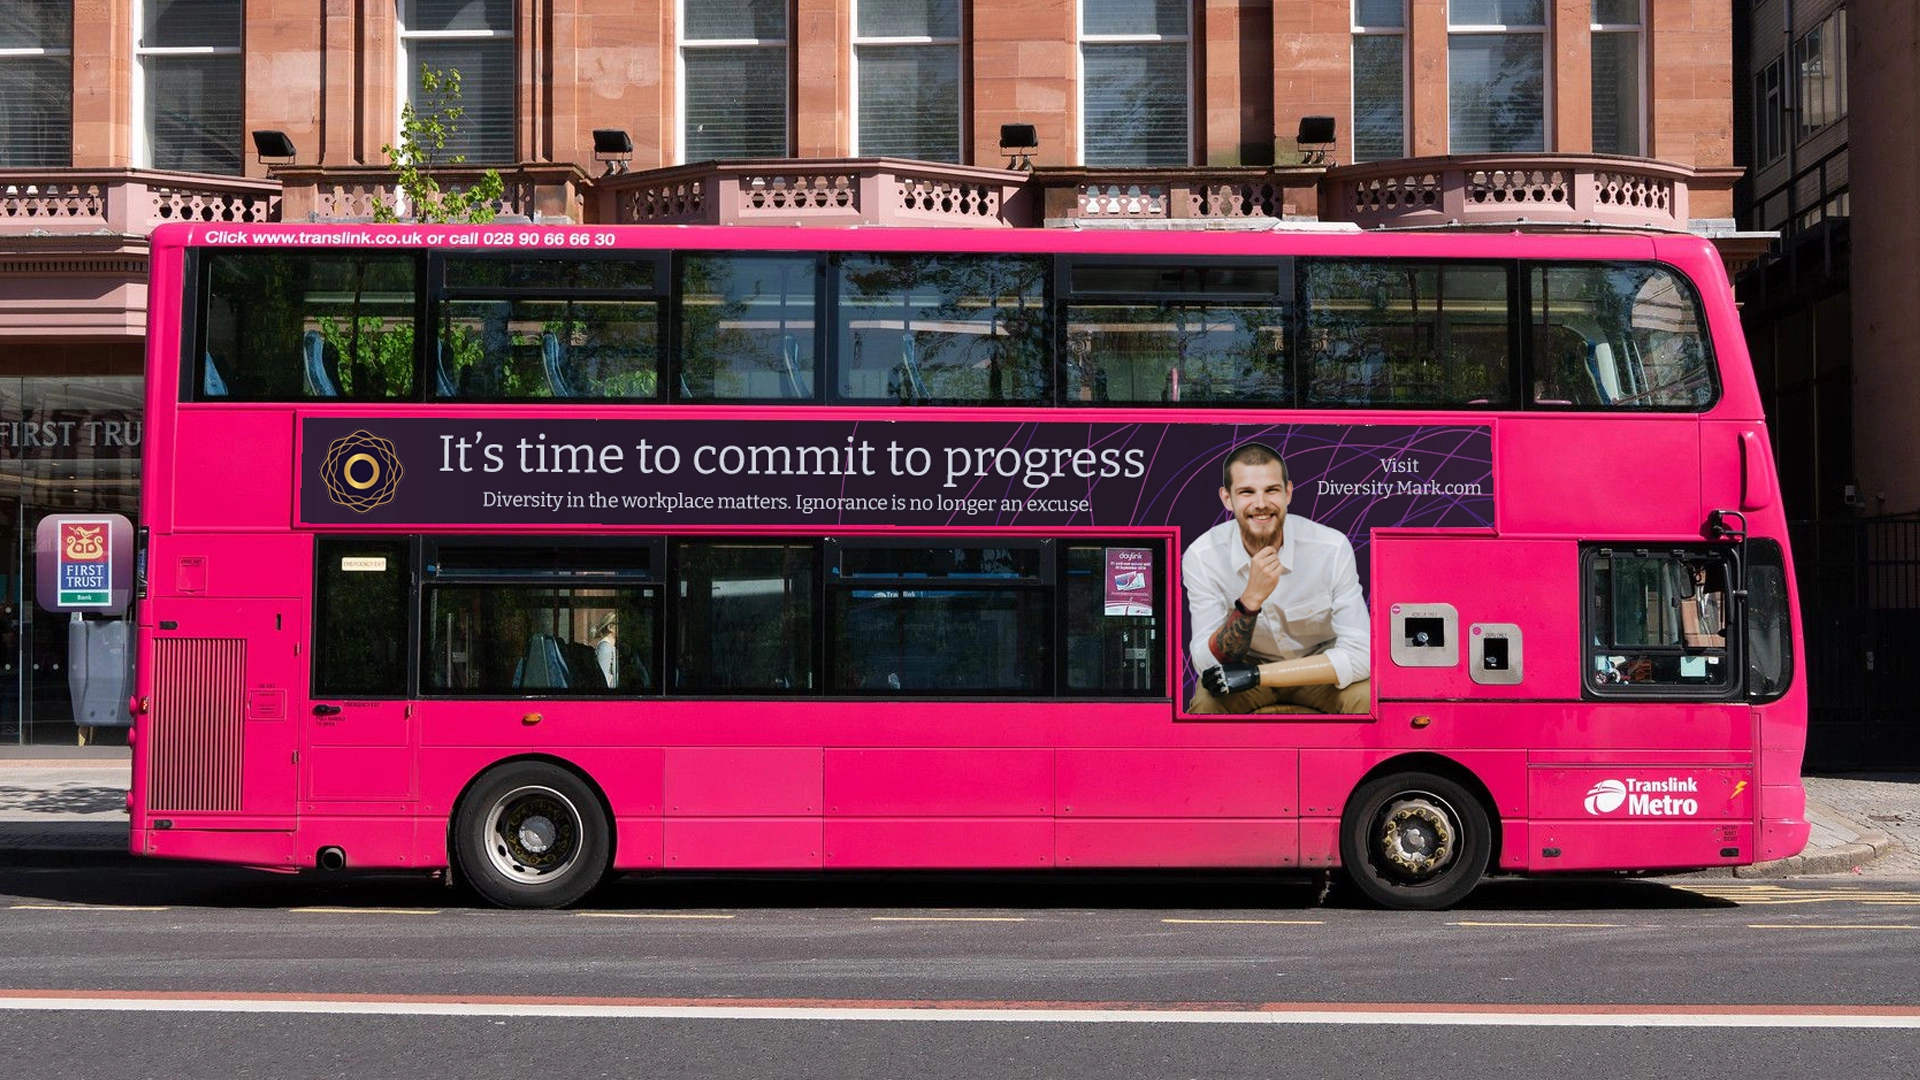 Diversity Mark bus advert - marketing and promotion by Belfast Agency Stenson Wolf